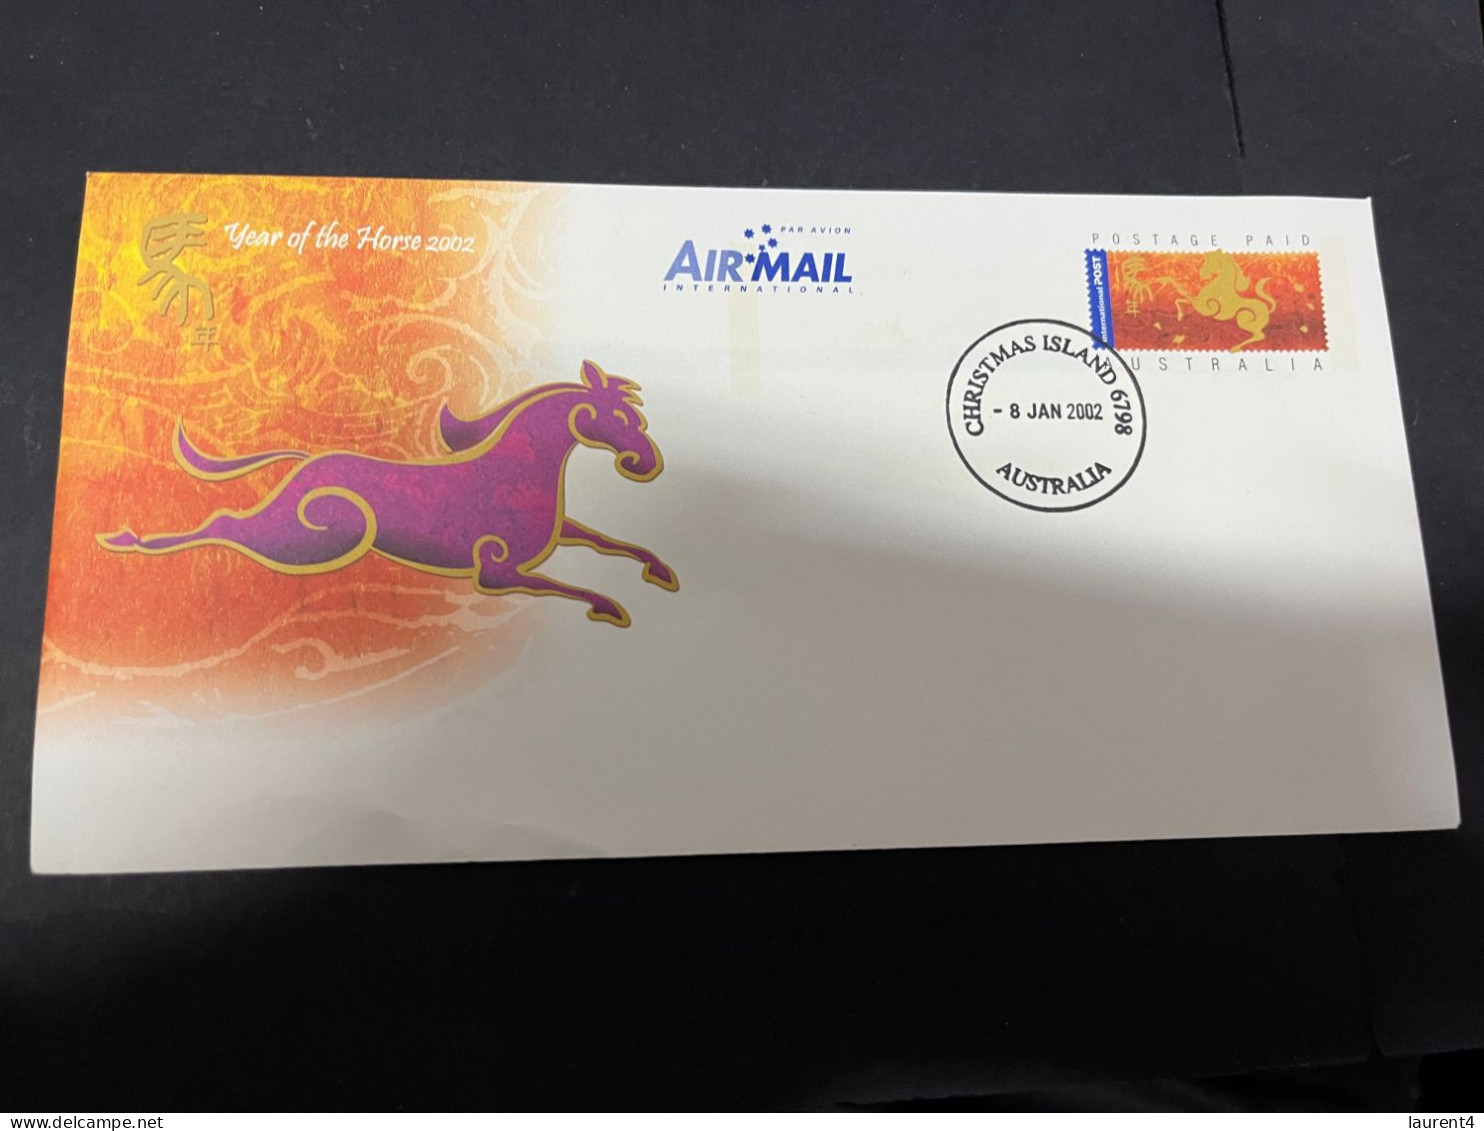 21-3-2024 (3 Y 39) Australia Christmas Island FDC - 2002 (2 Aerogramme Cover) Chinese New Year Of The Horse - Christmaseiland